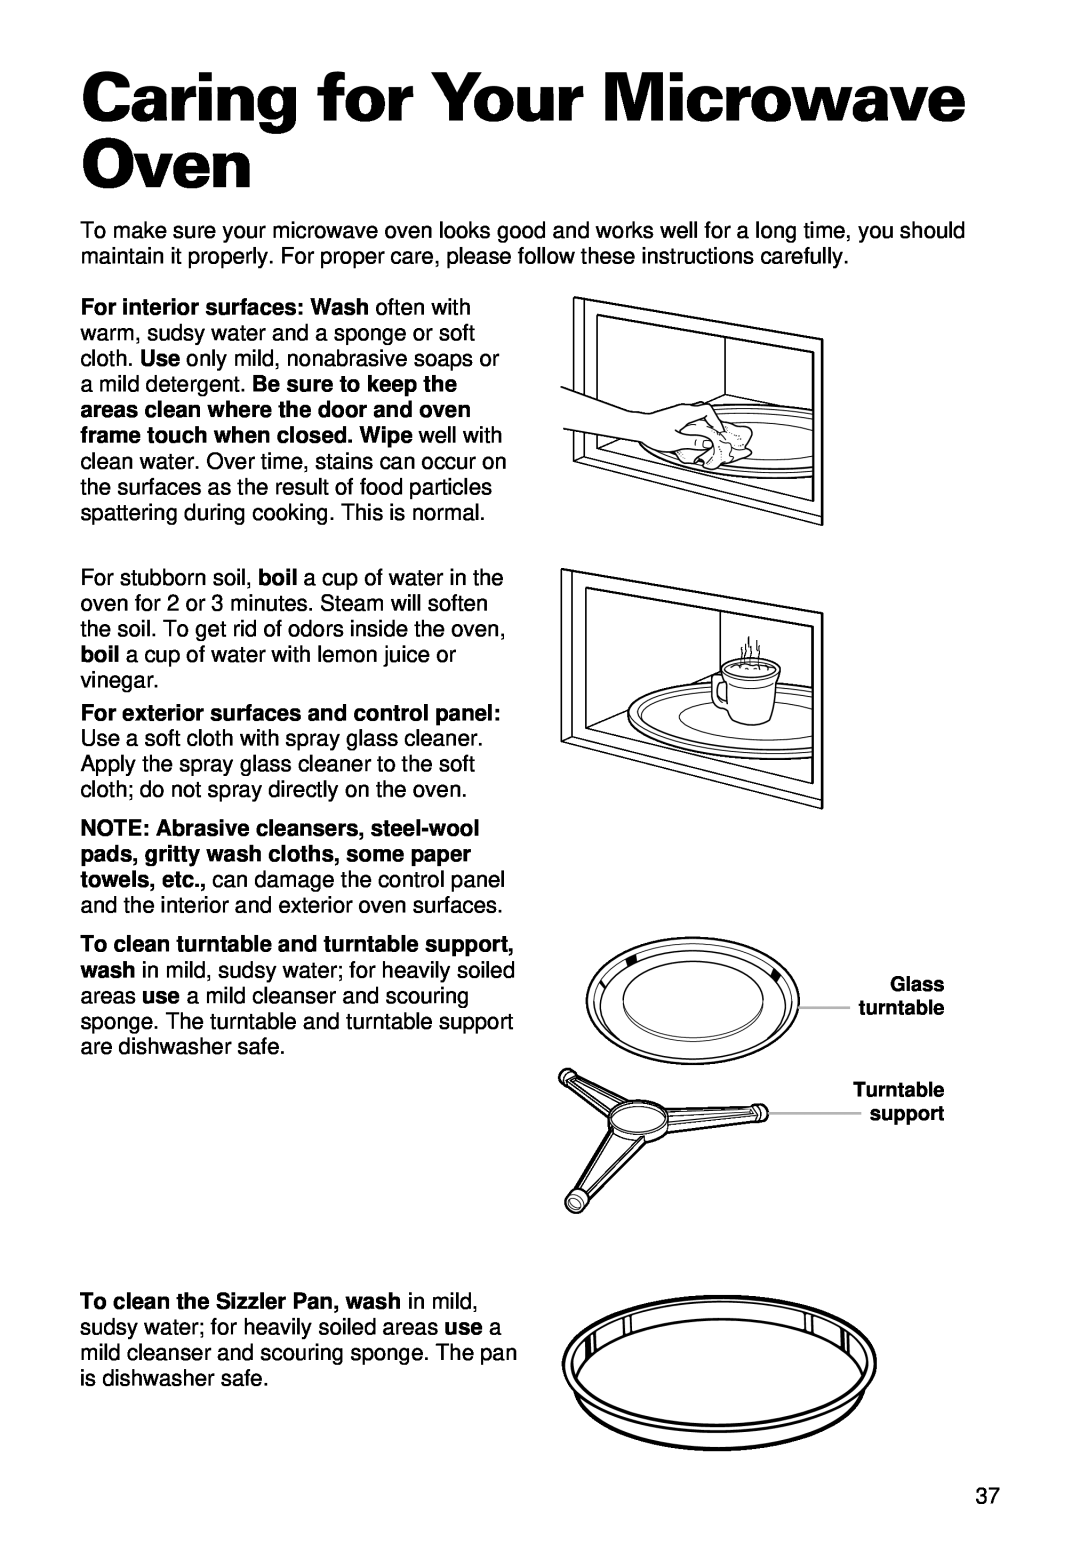 Whirlpool YMT9102SF, YMT9092SF installation instructions Caring for Your Microwave Oven, Glass turntable Turntable support 